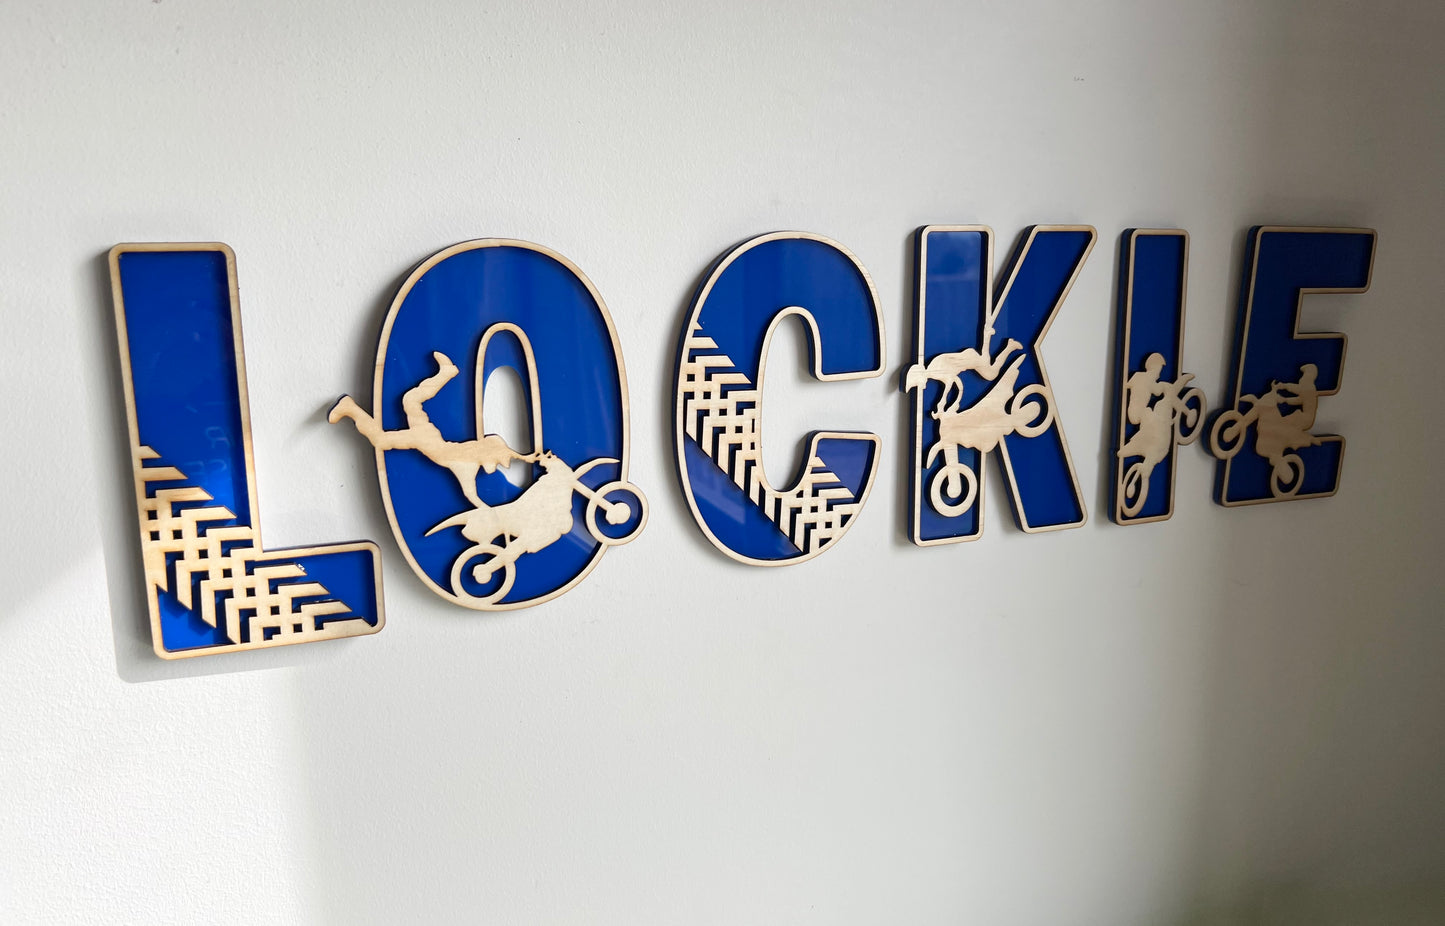 Motorbike - Themed letters